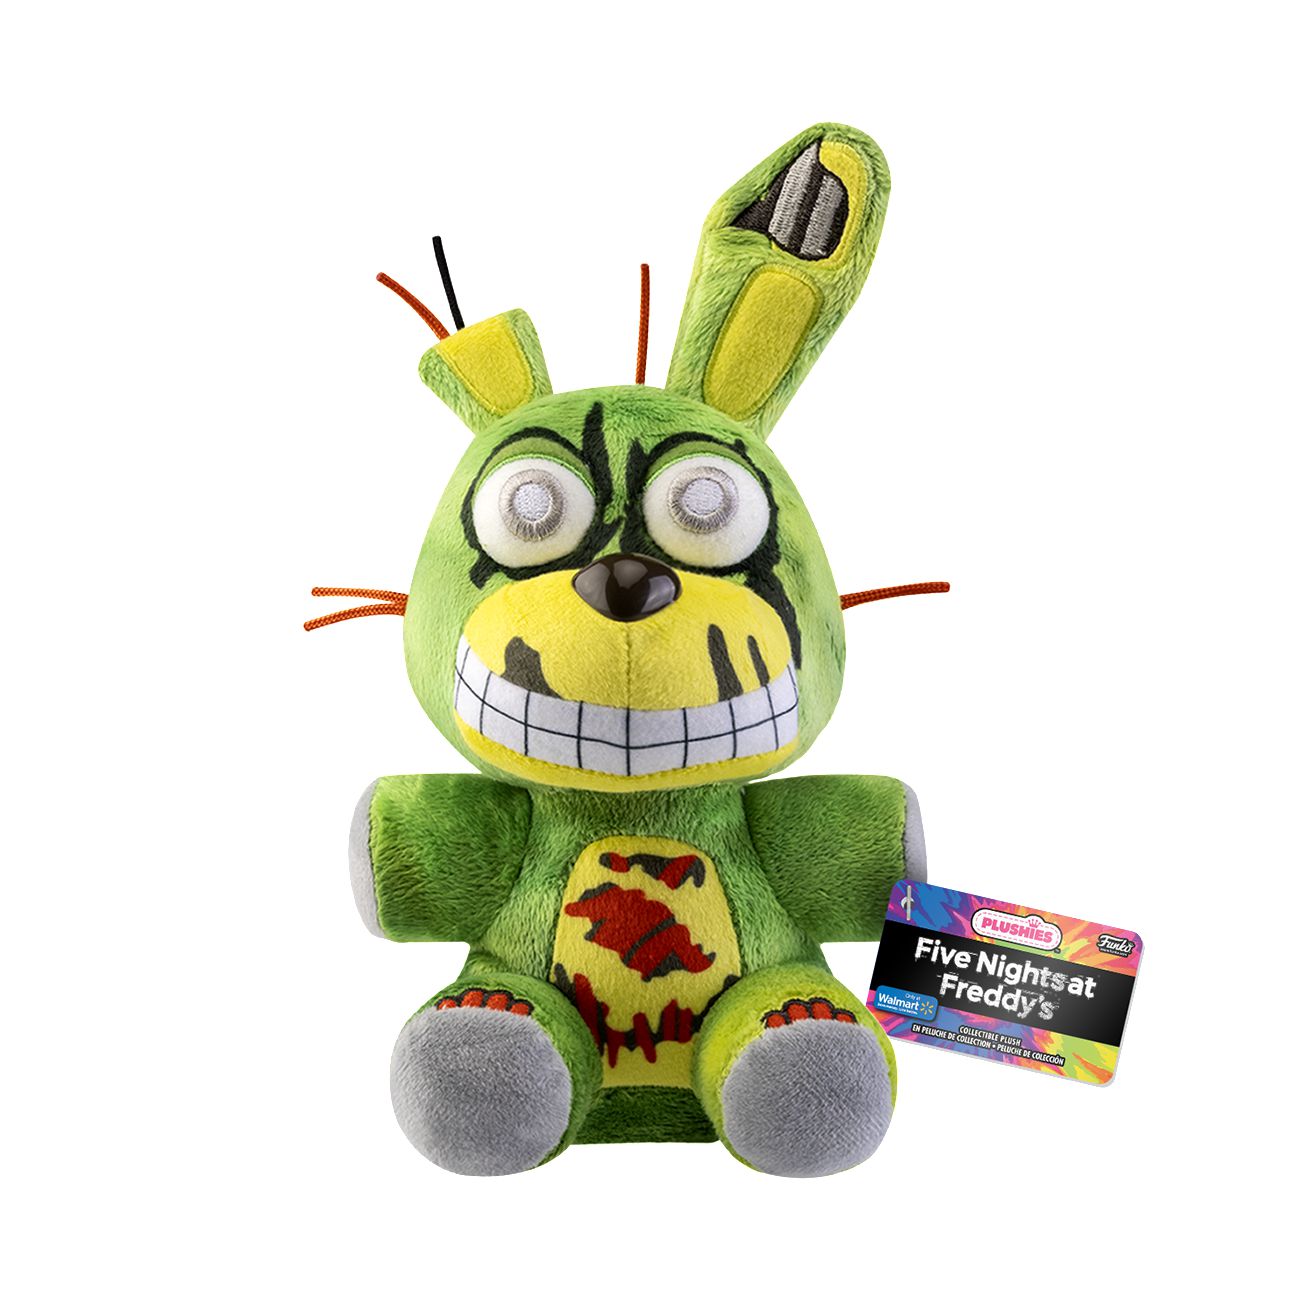 FNAF's Springtrap Built With LEGO Is a Perfect Animatronic Nightmare